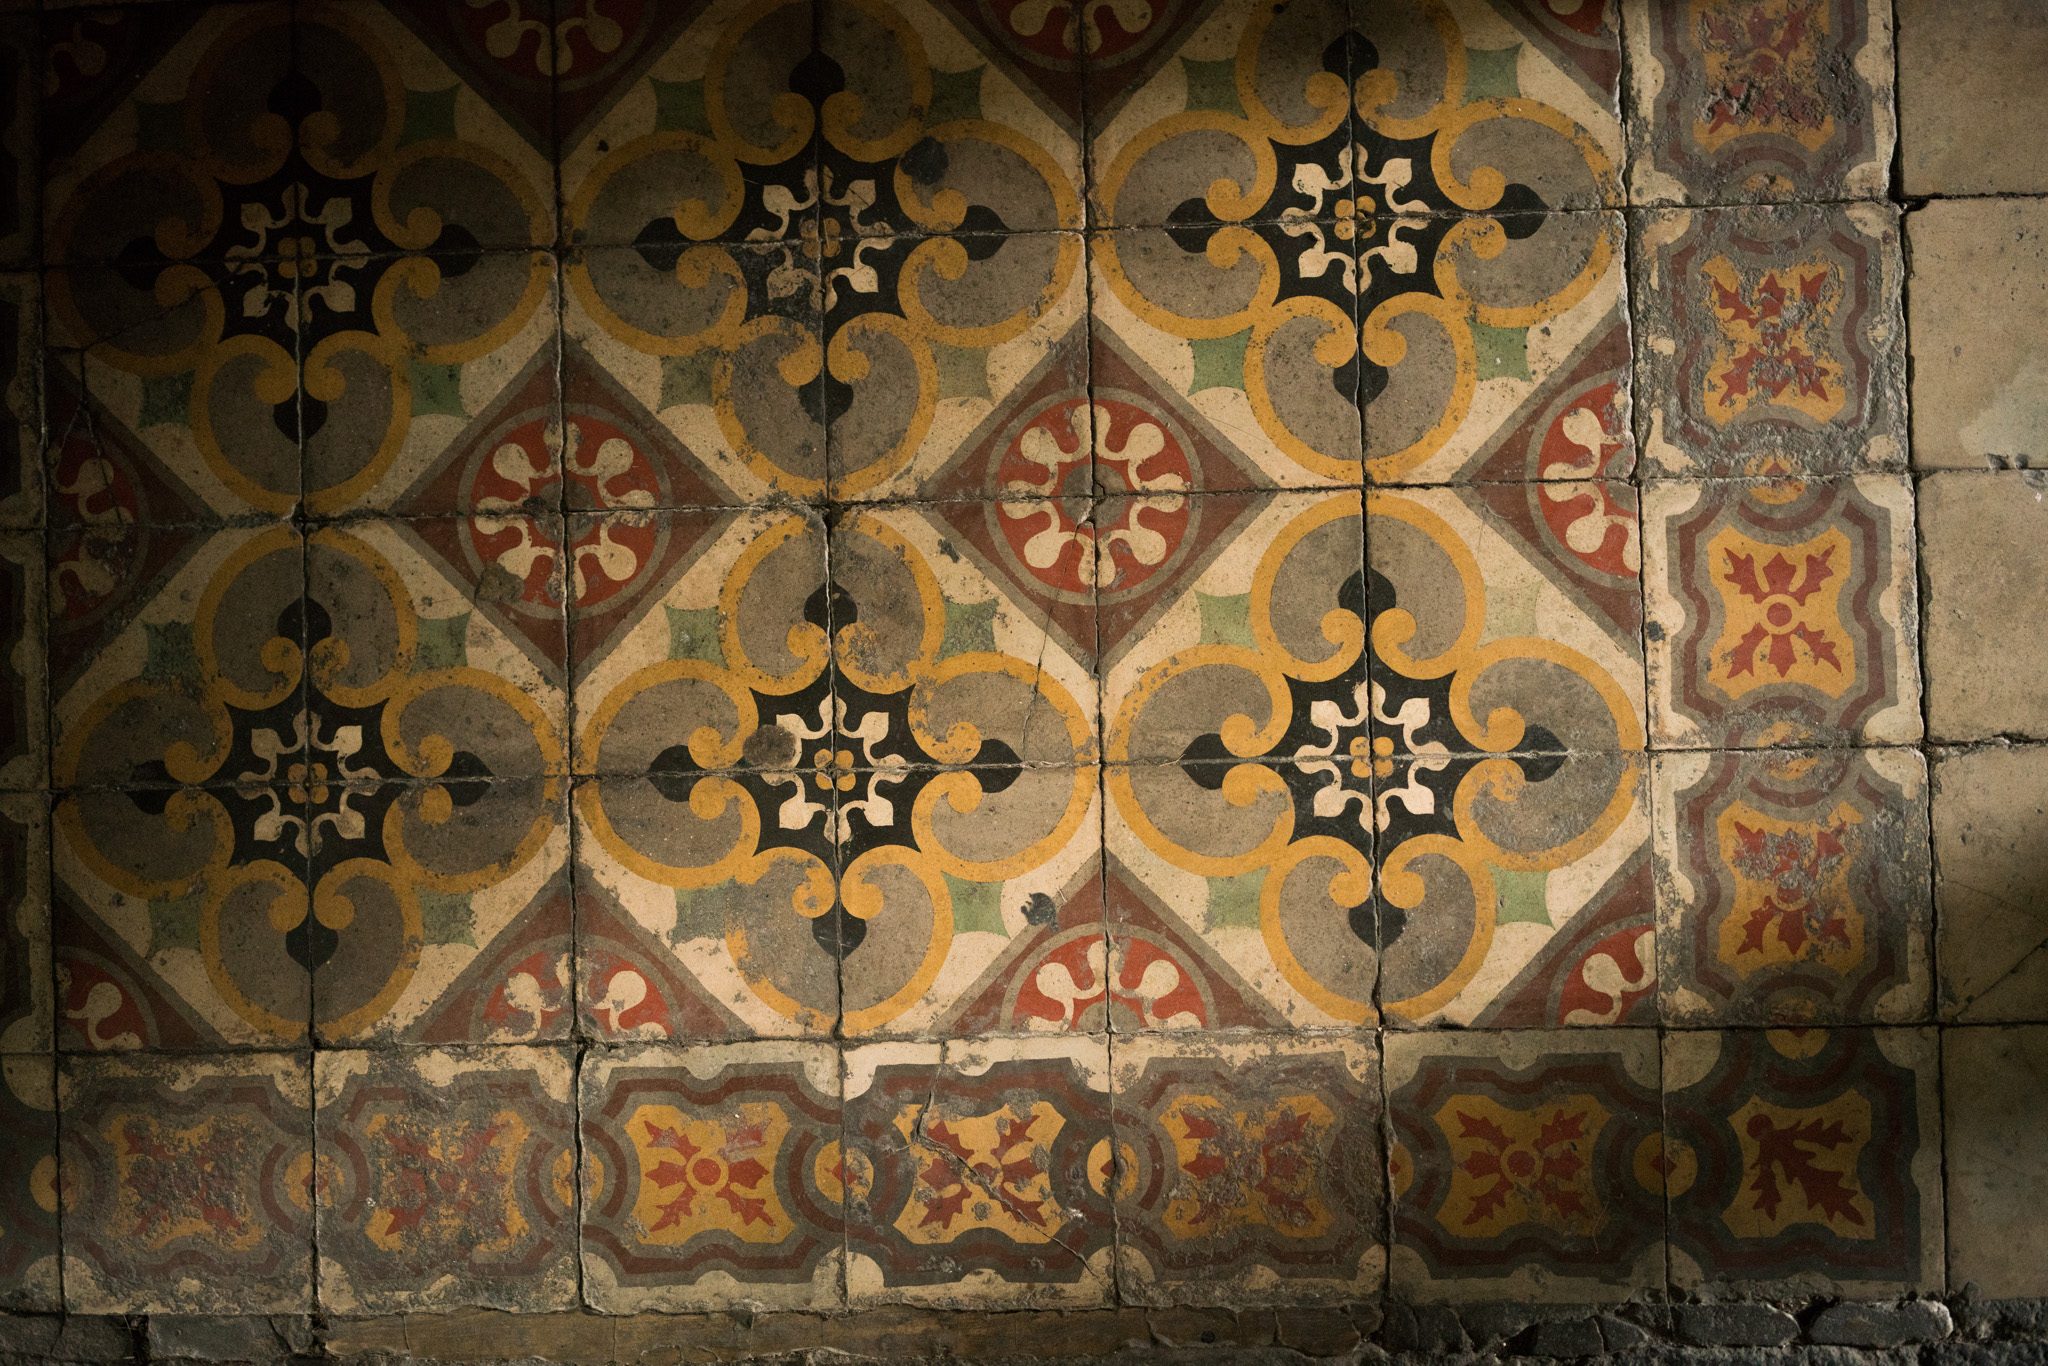 100 YEAR OLD COLORS. These barely faded tiles, imported from Morocco, remain as colorful as ever. Photo by Martin San Diego/Rappler